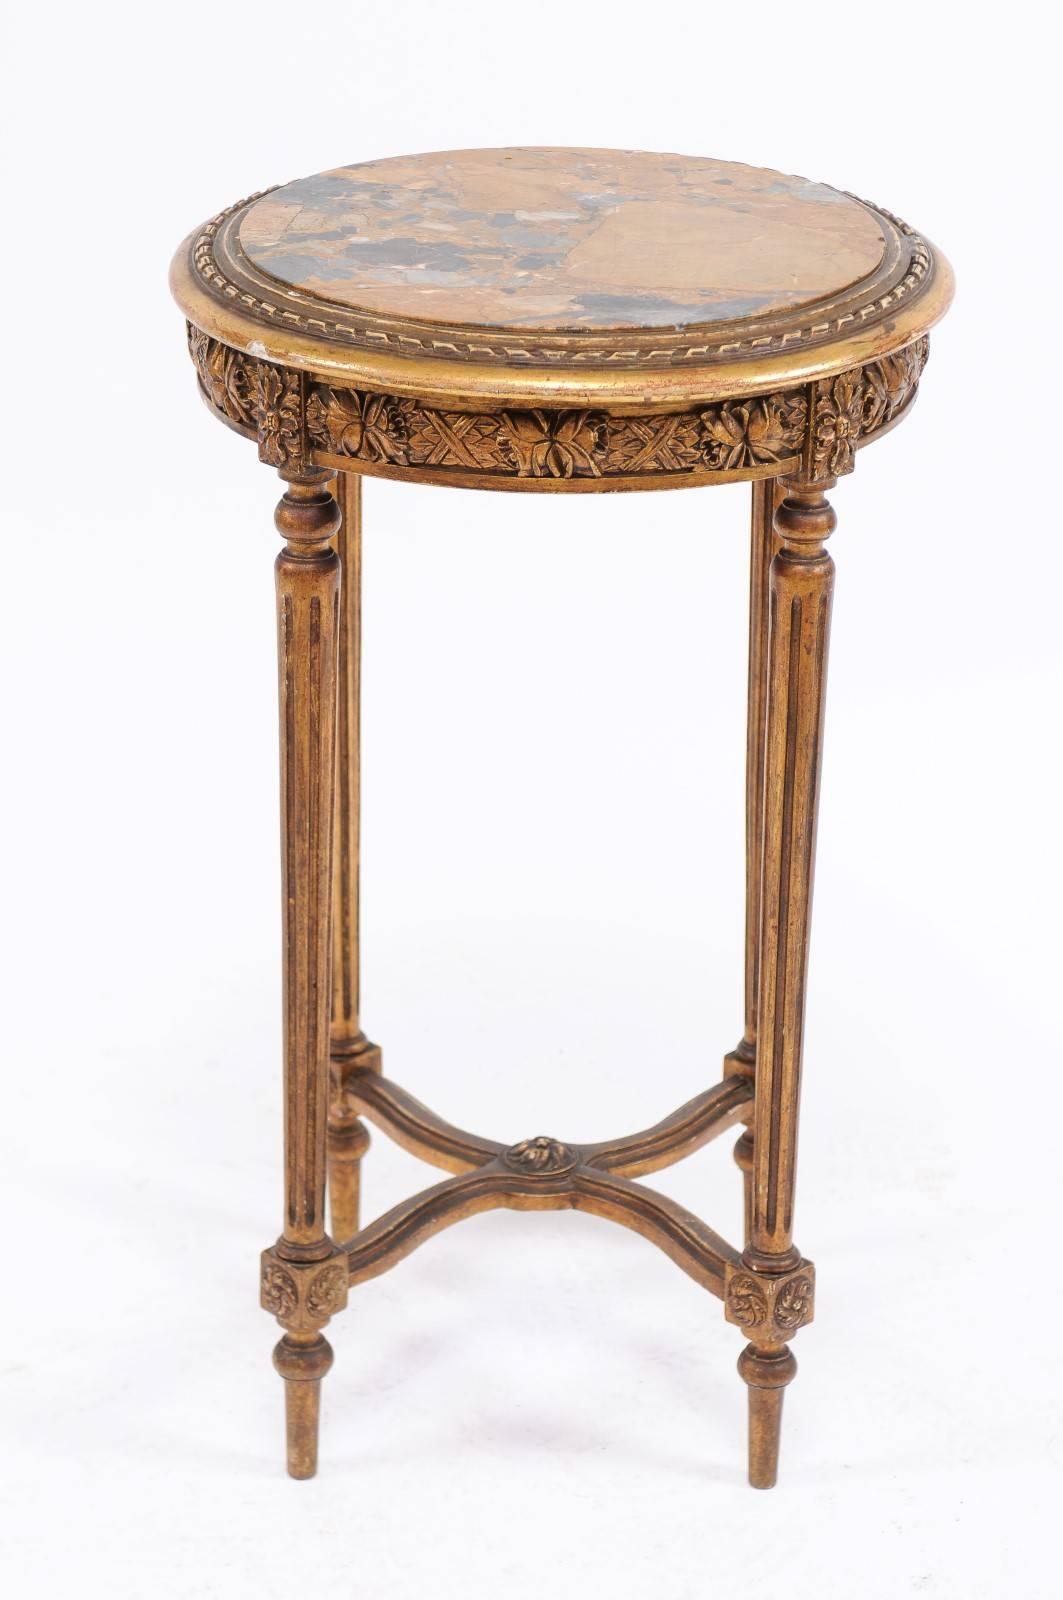 Gilt French 1930s Neoclassical Style Gilded Guéridon Table with Variegated Marble Top